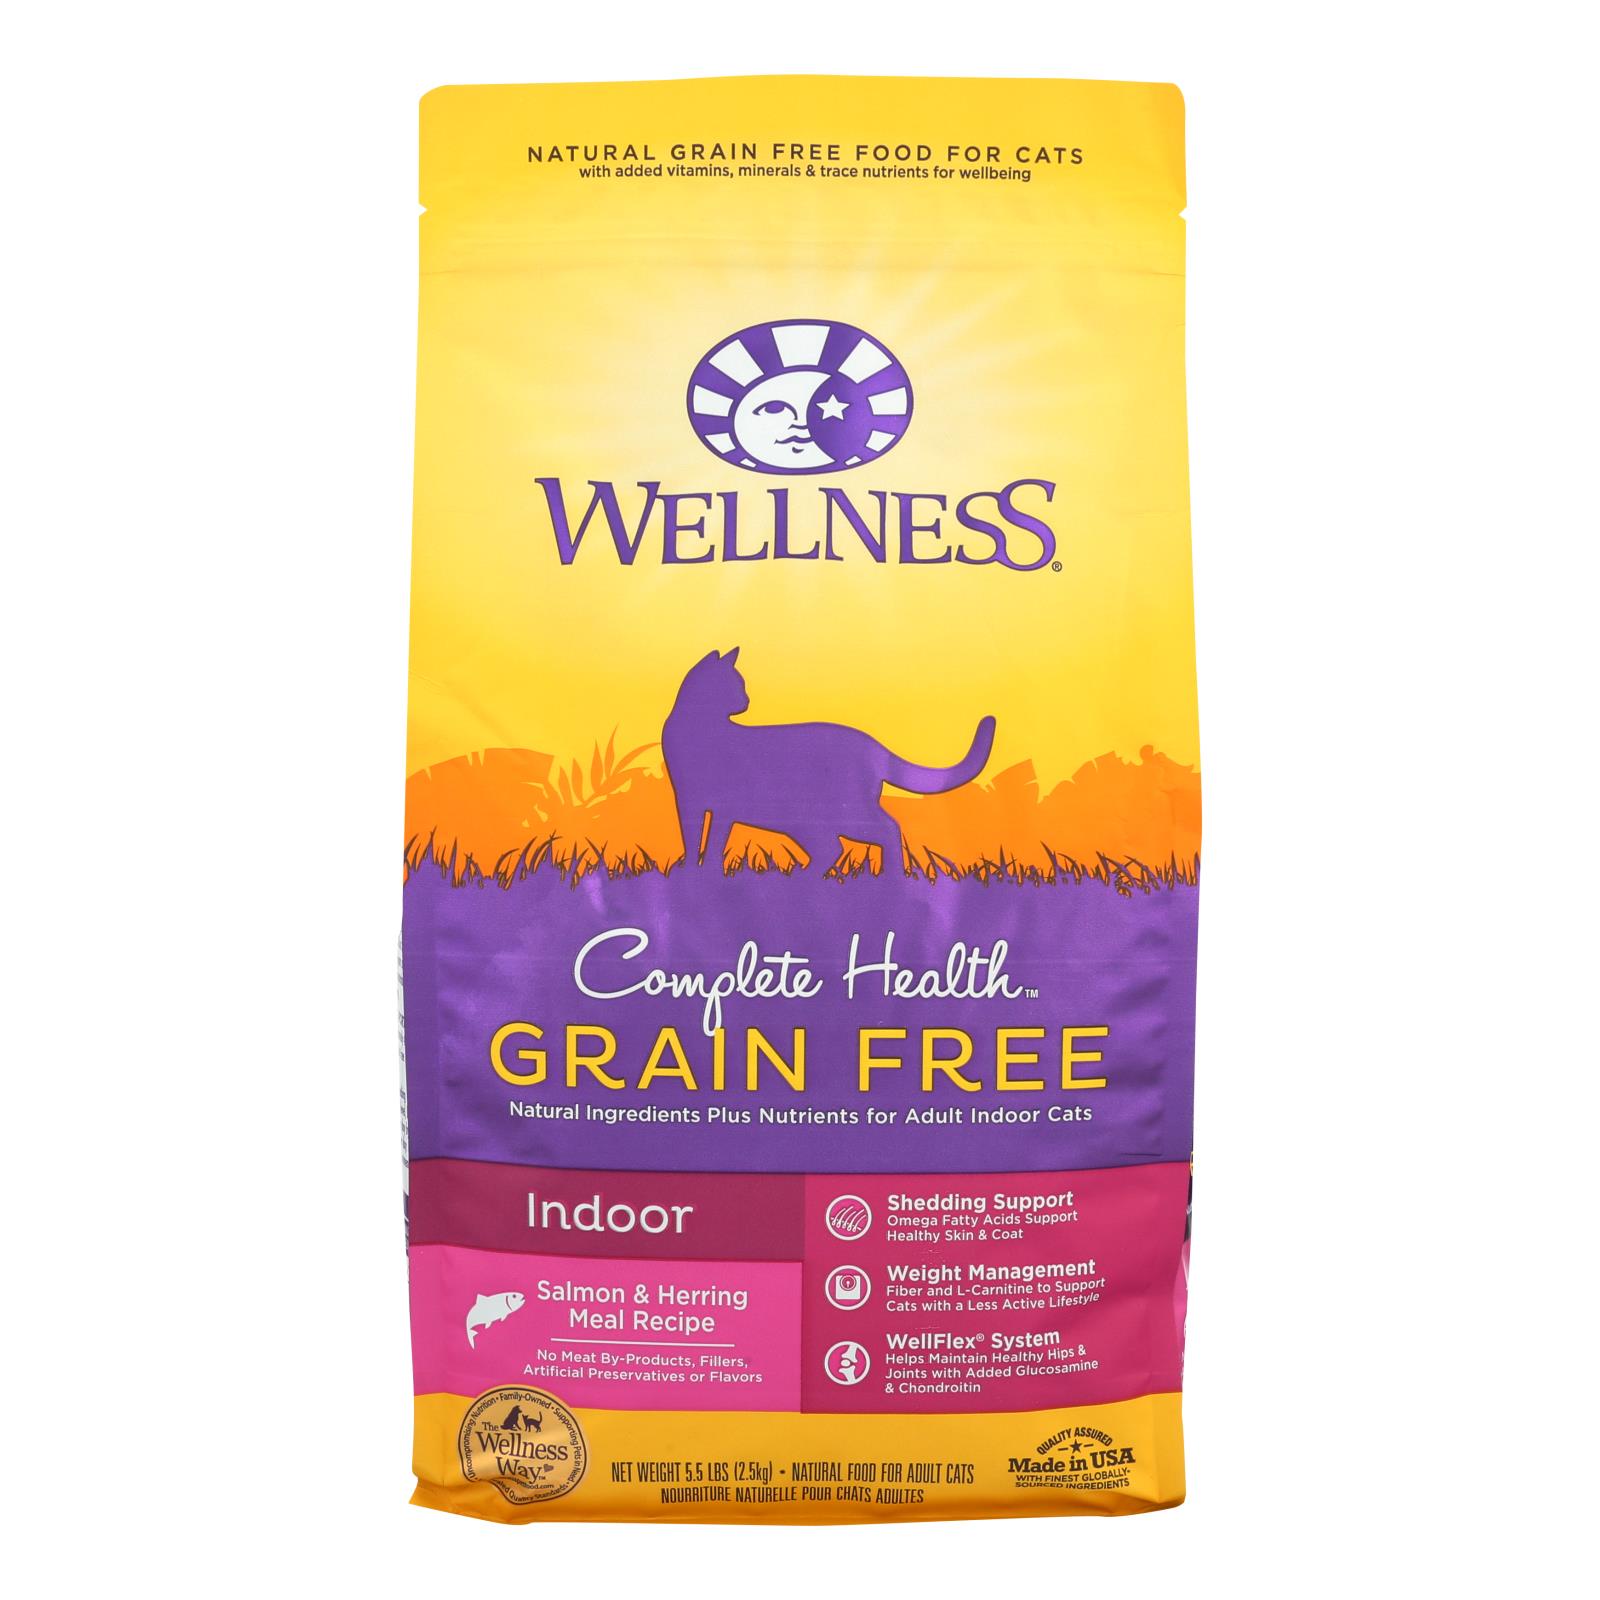 Wellness Pet Products - Cmplt Hlth Meal Salm/hrng - 4개 묶음상품 - 5.5 LB